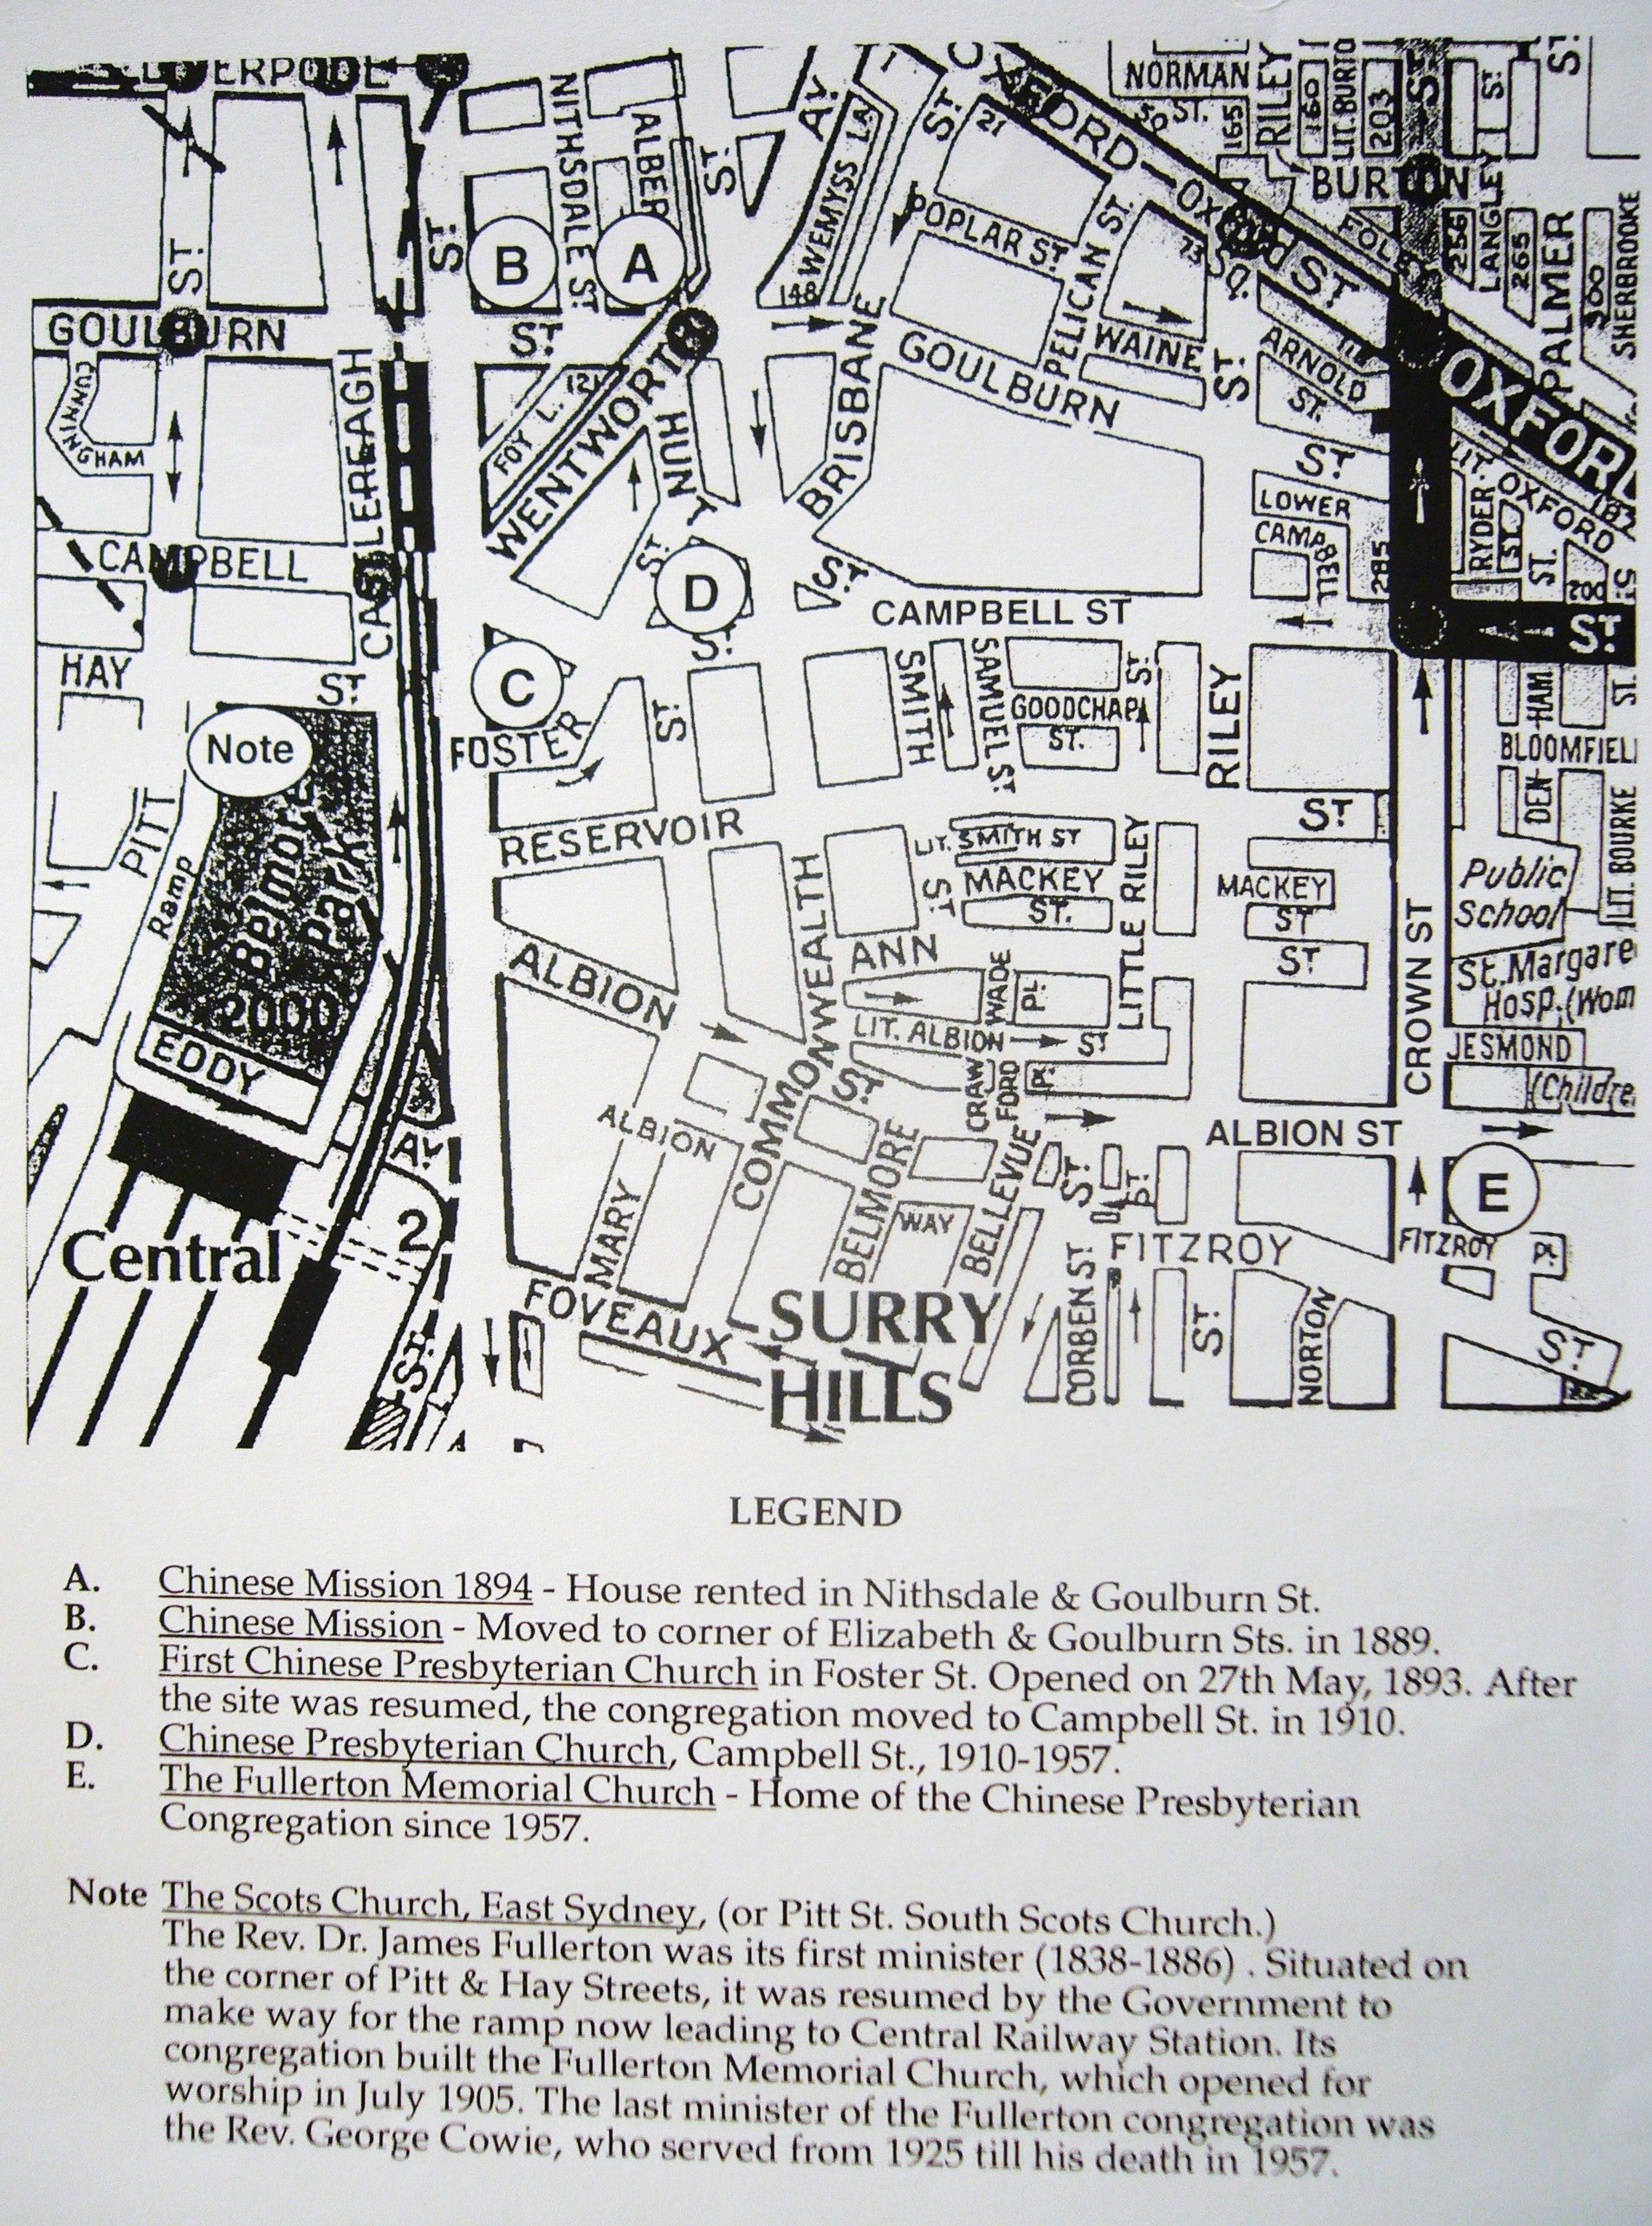  Locations of the Chinese Presbyterian Church (from 1884 to today) (courtesy of Howard Wilson)